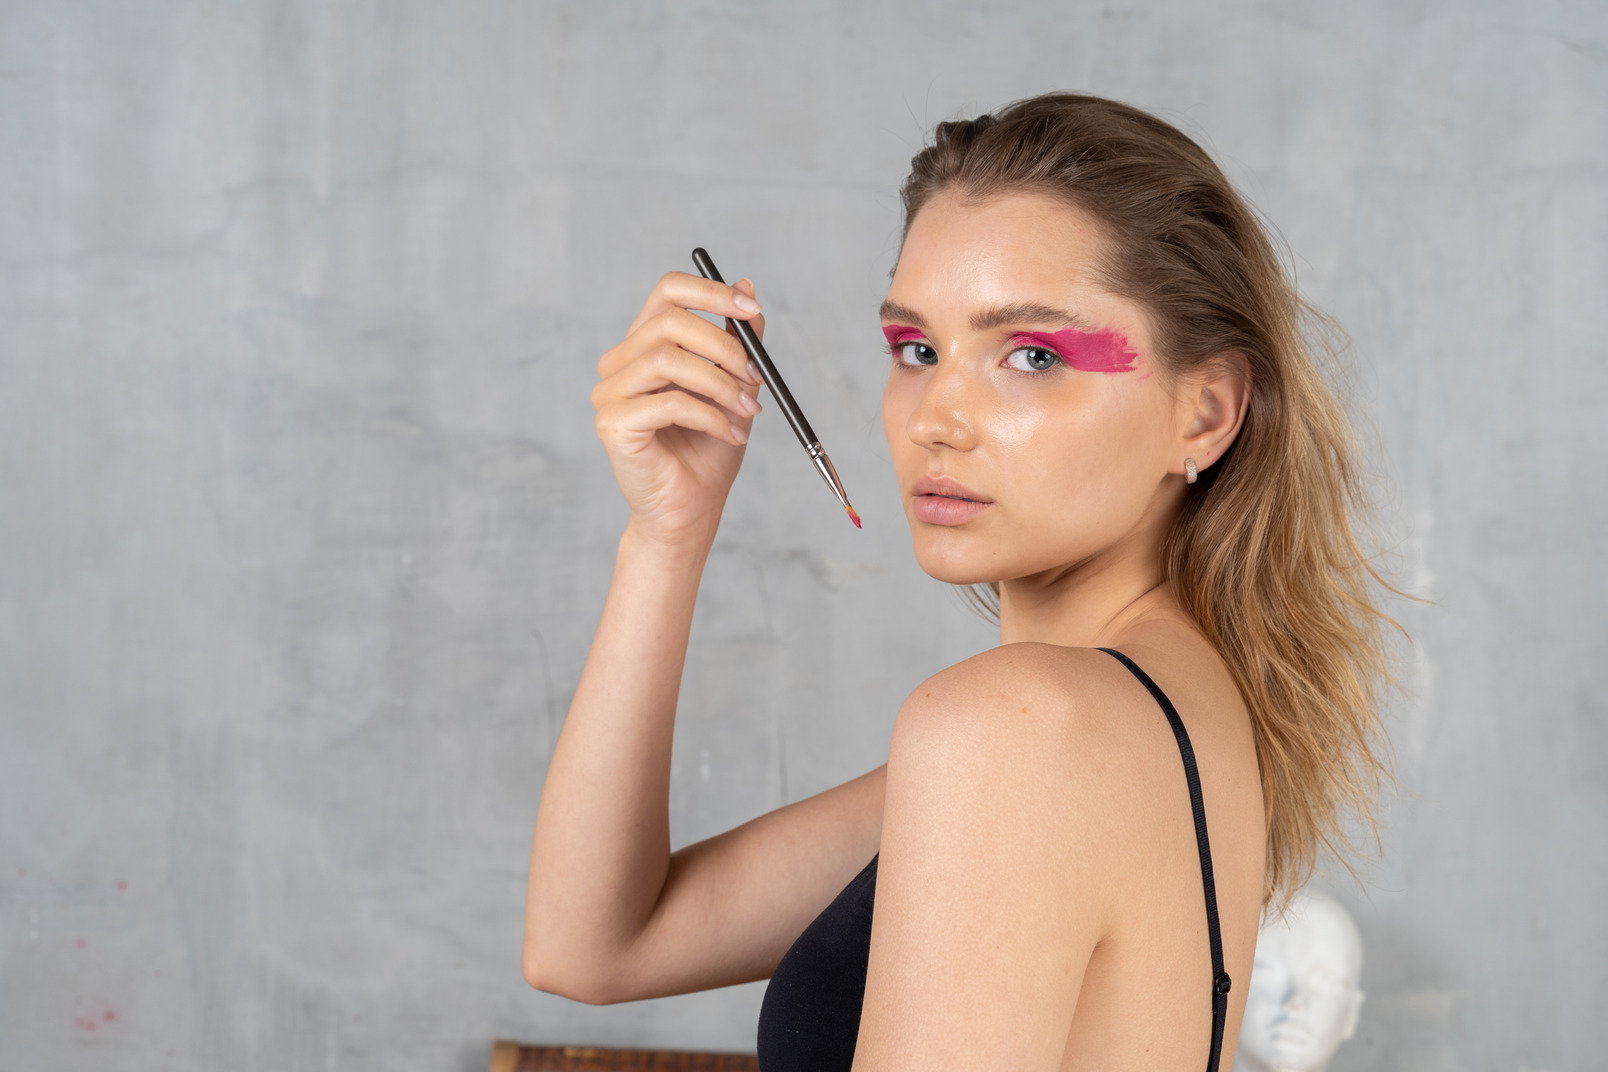 Side view of a young woman with bright pink eye make-up looking at camera while holding brush